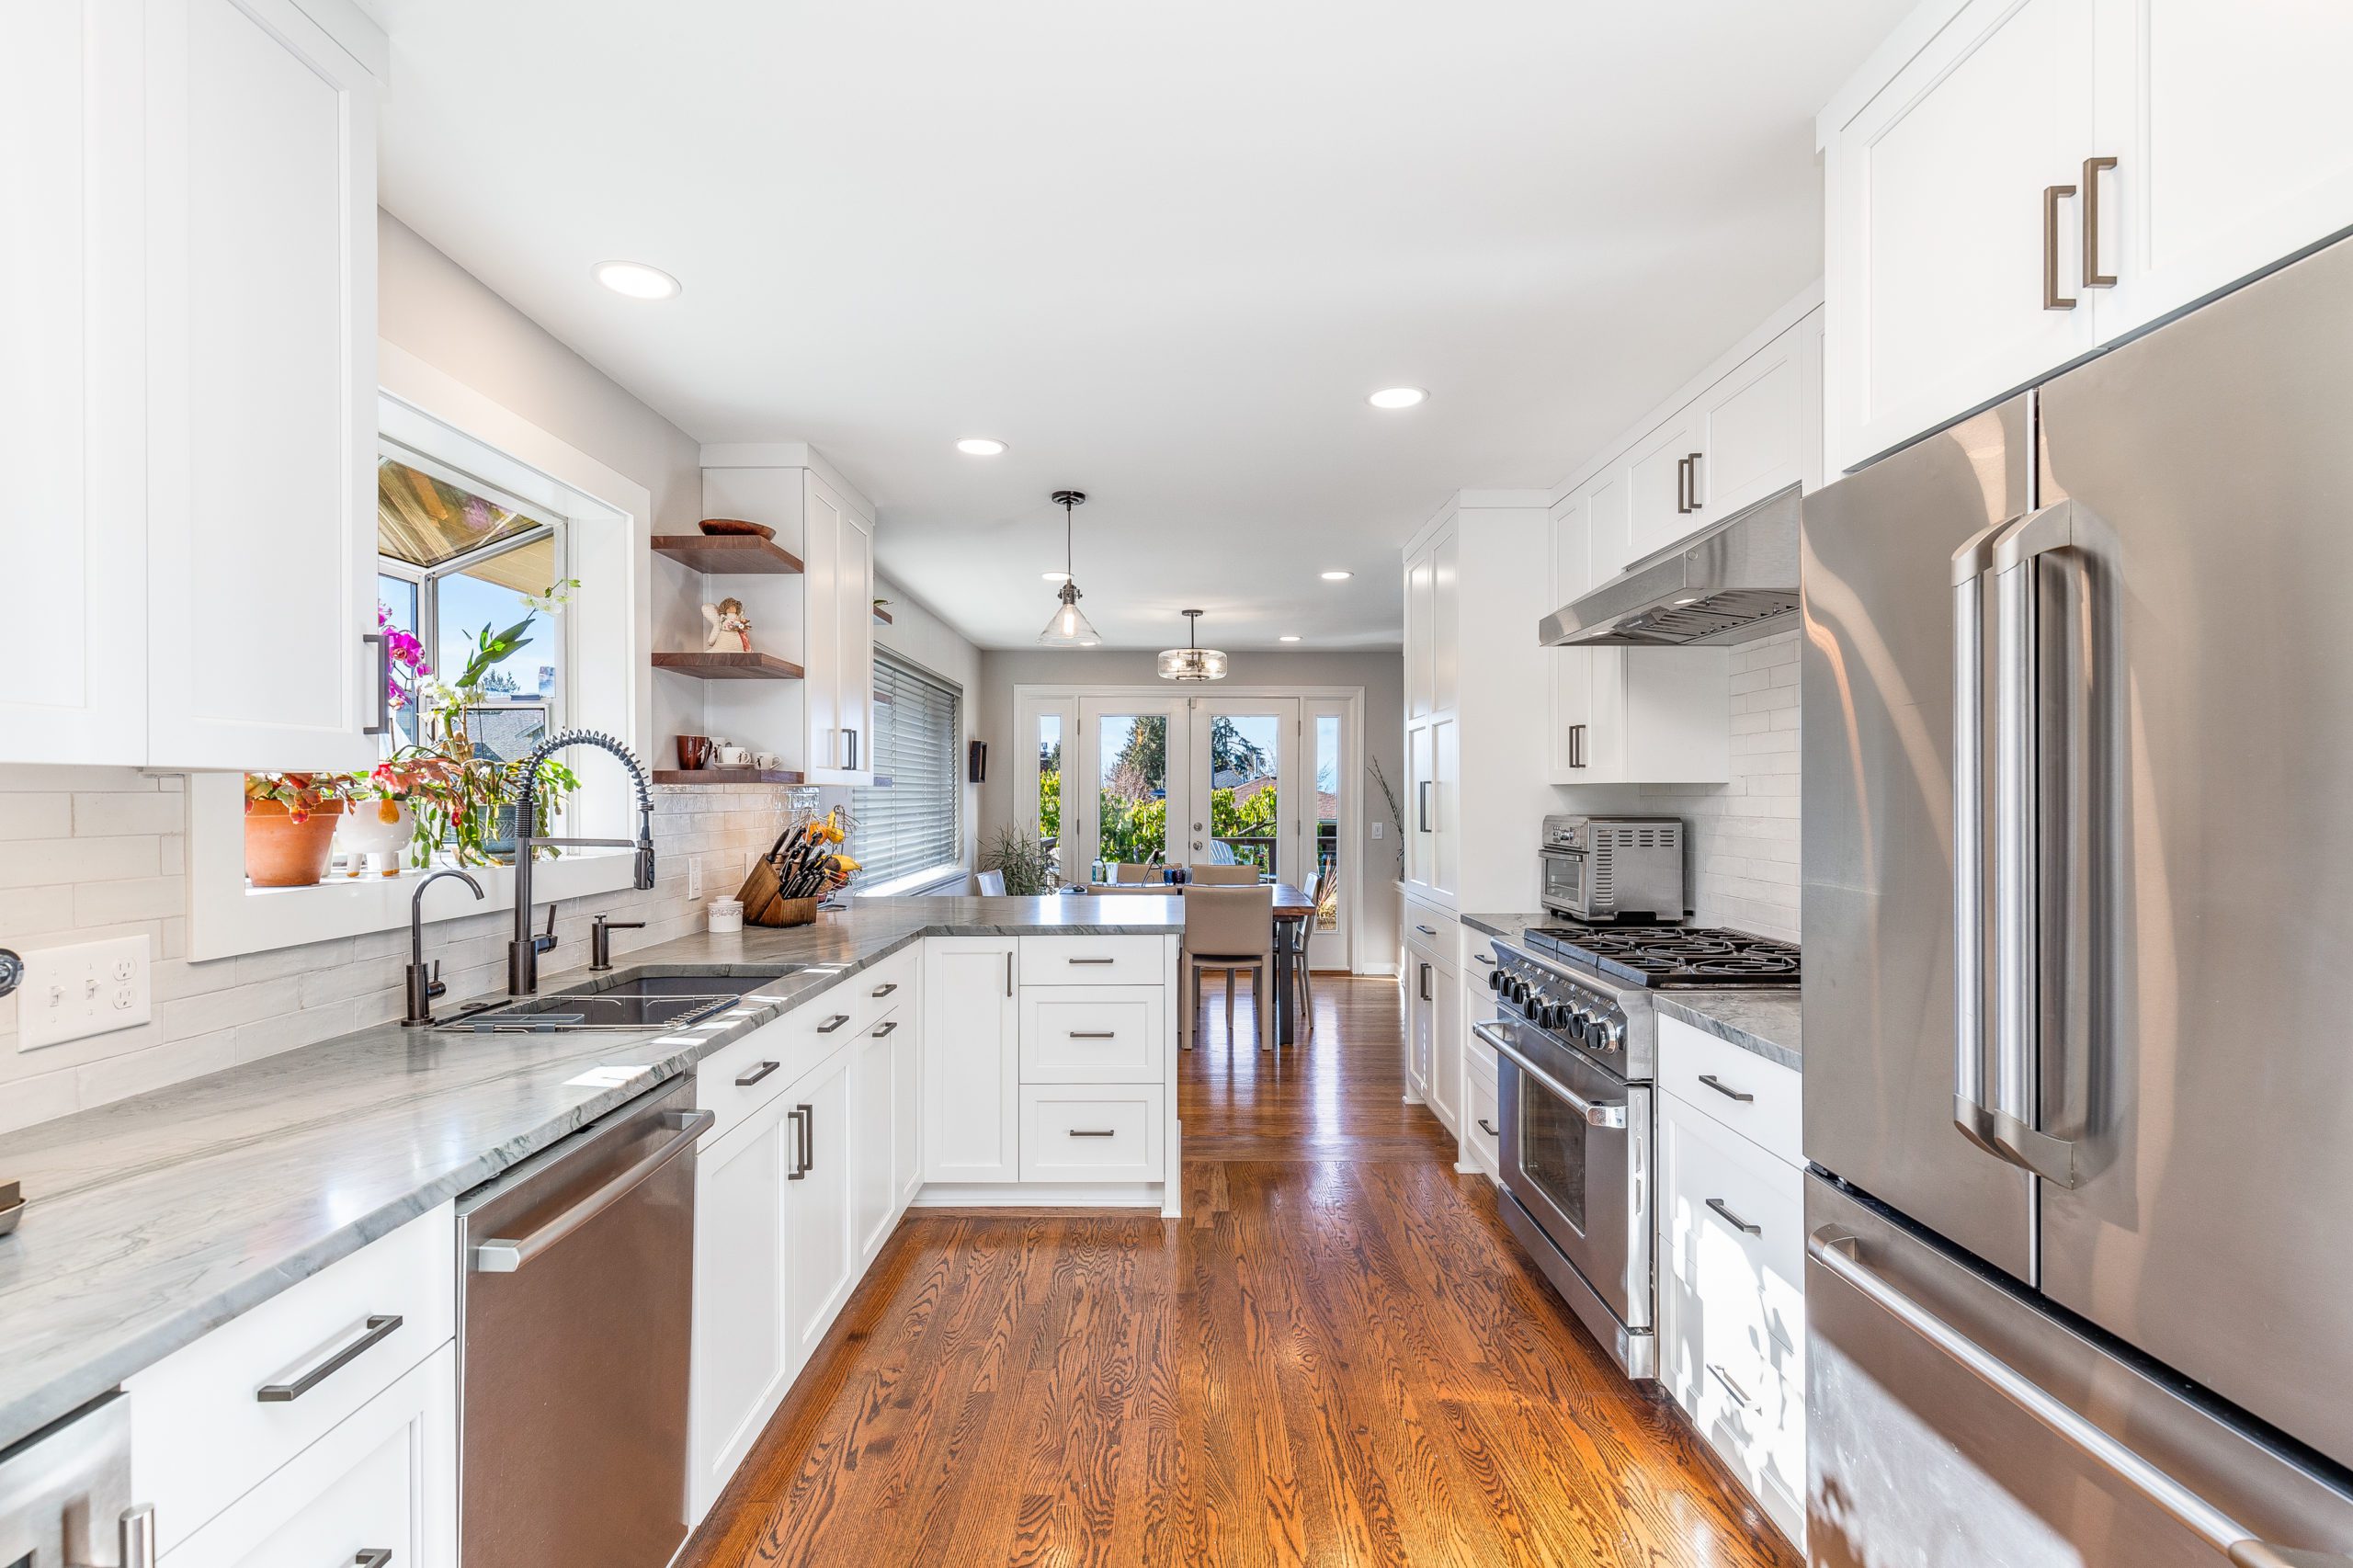 Kitchen remodel with wooden floors, white cabinetry, marble counter tops, new silver appliances and large window